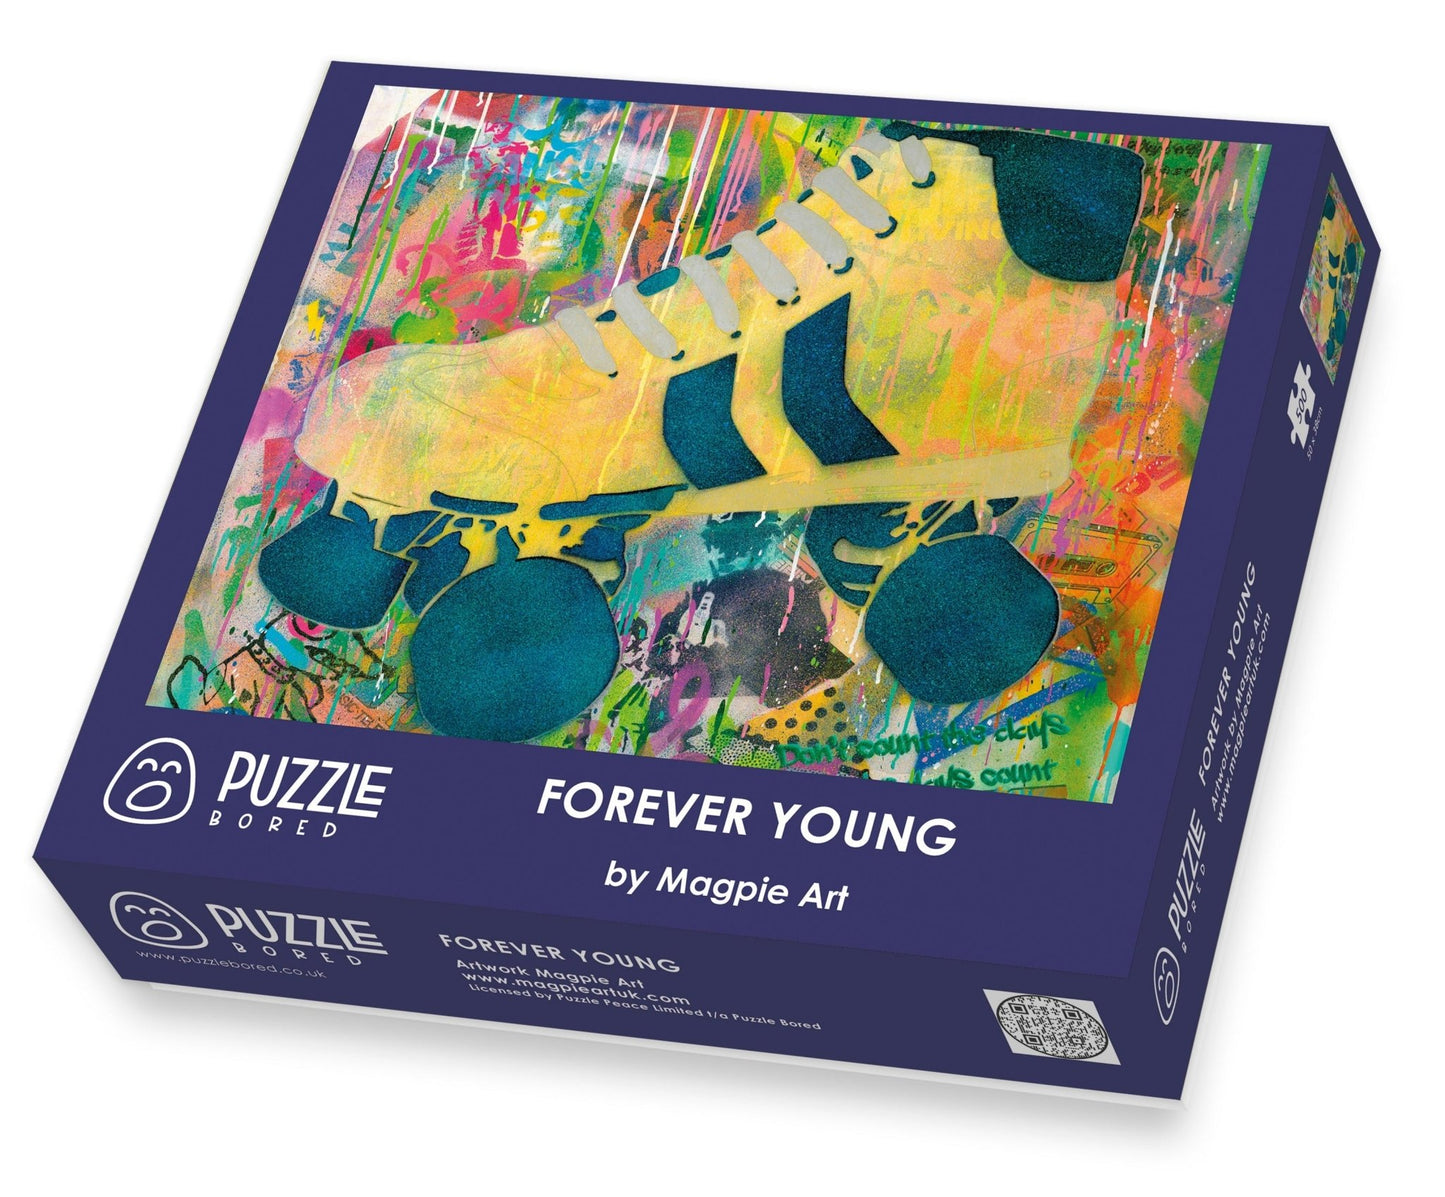 Forever Young by Magpie Art - Puzzle Bored